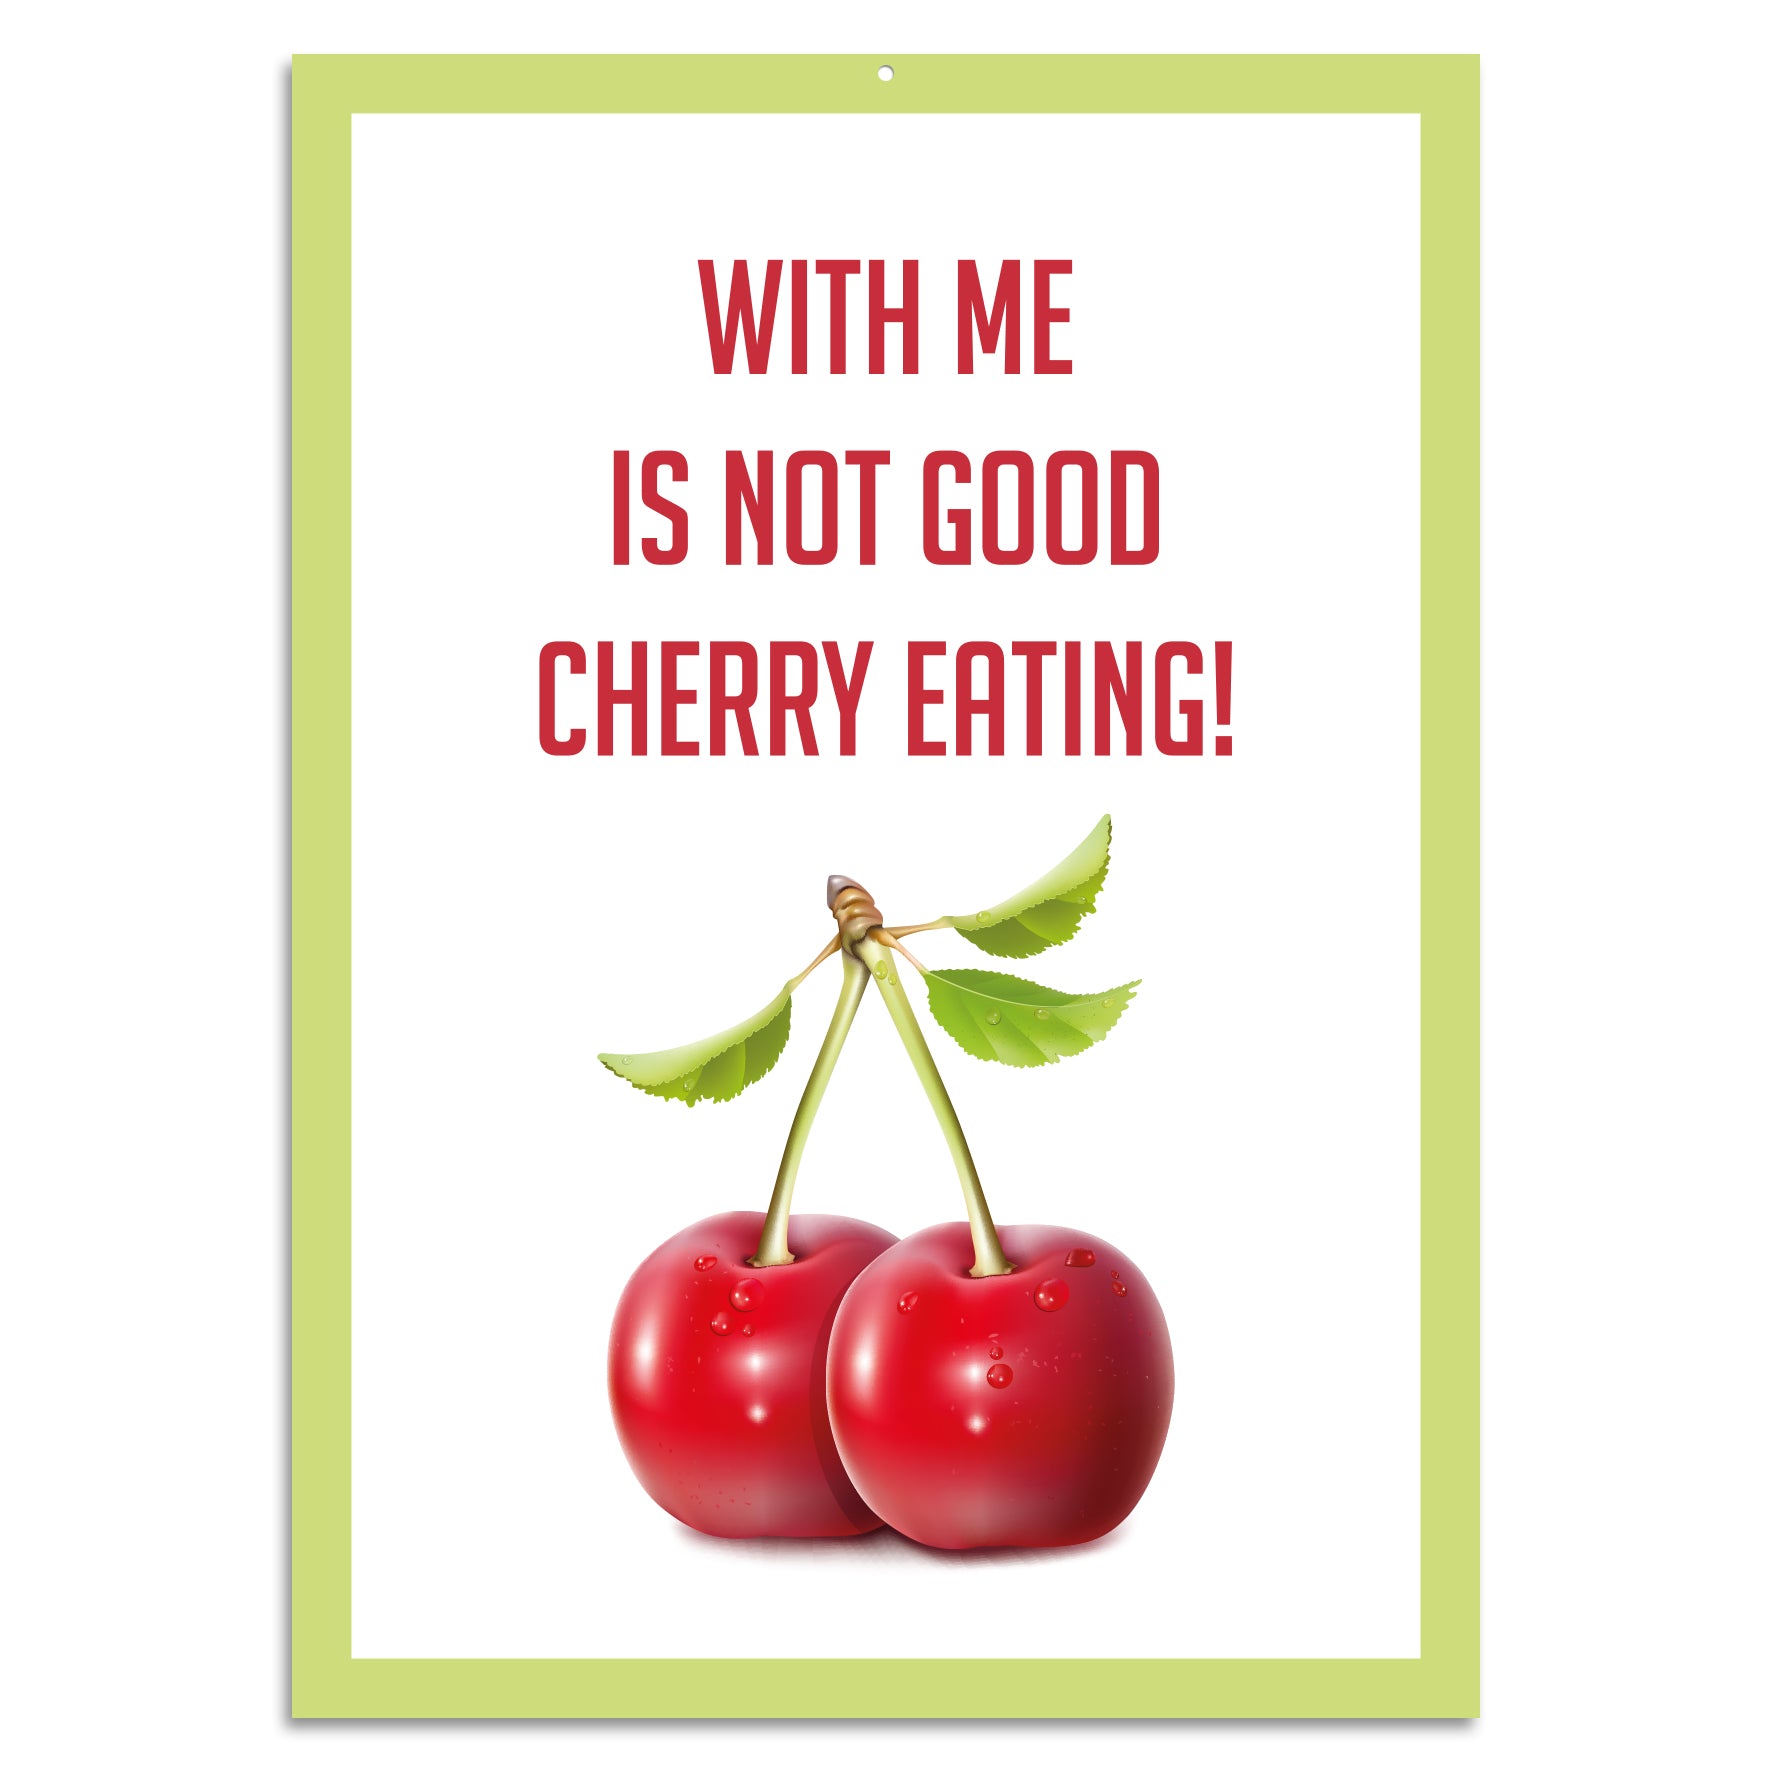 Blechschild - With me is not good cherry eating!